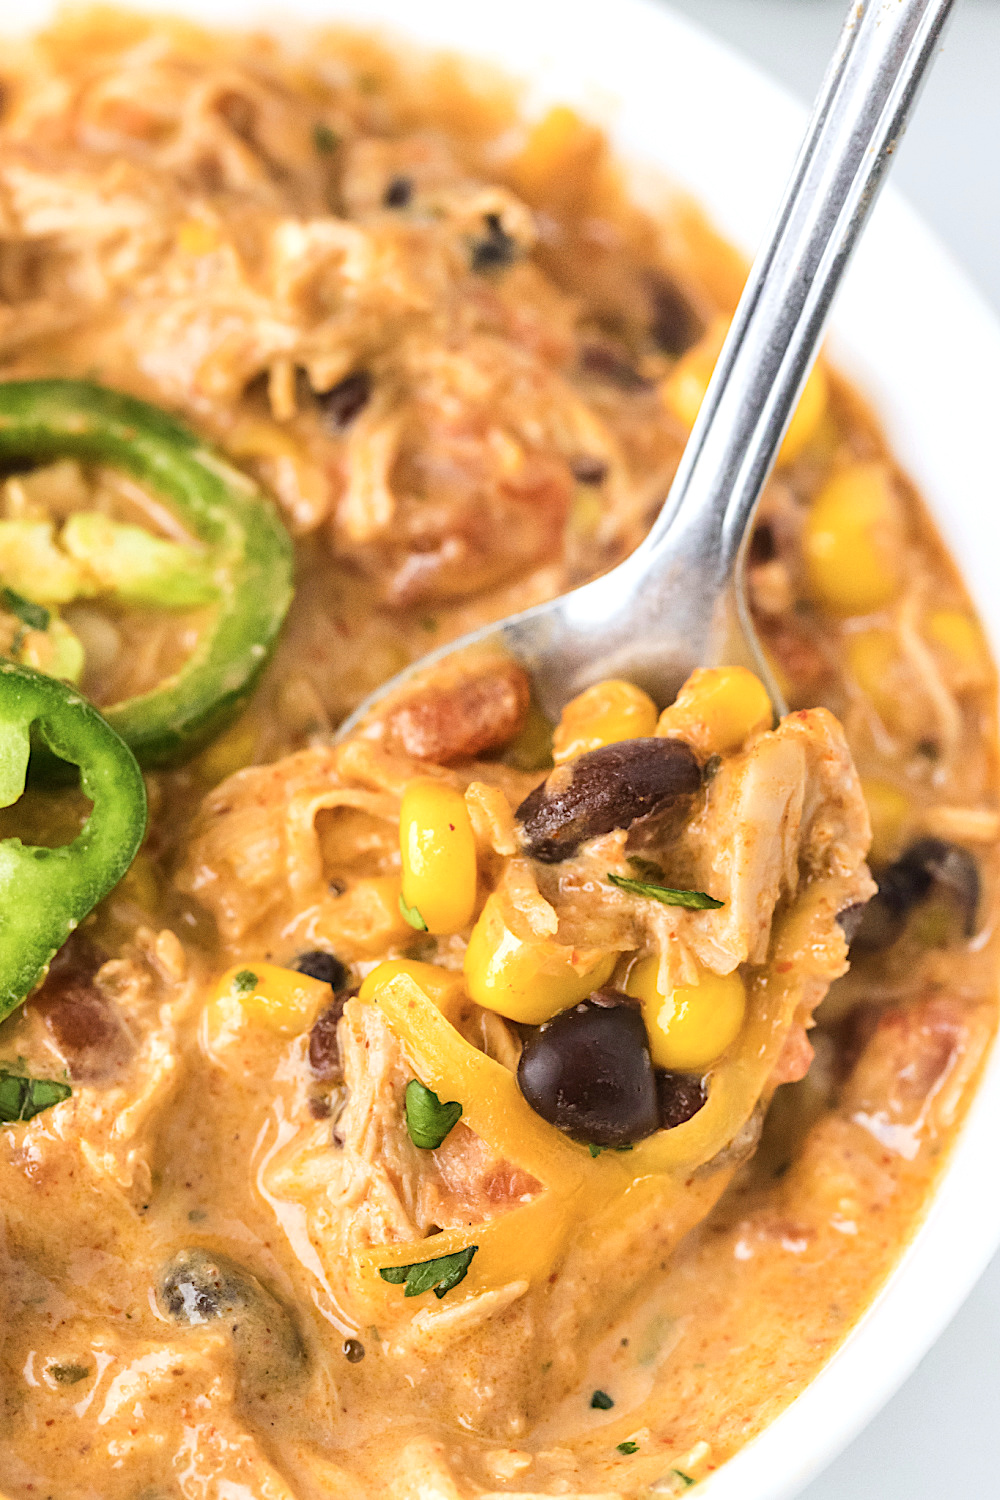 Spoonful of Chicken Chili